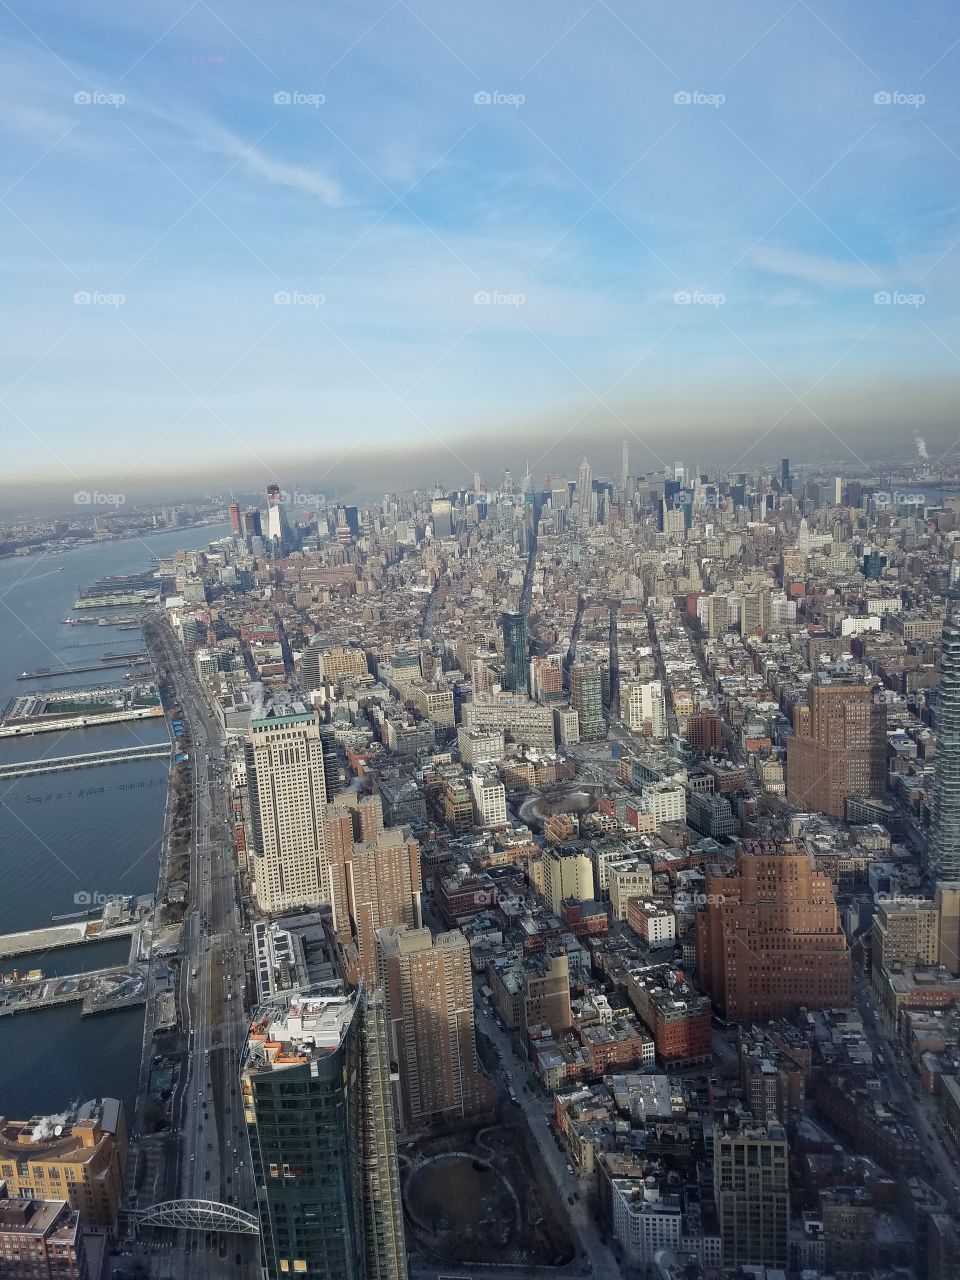 NYC from WTC 1